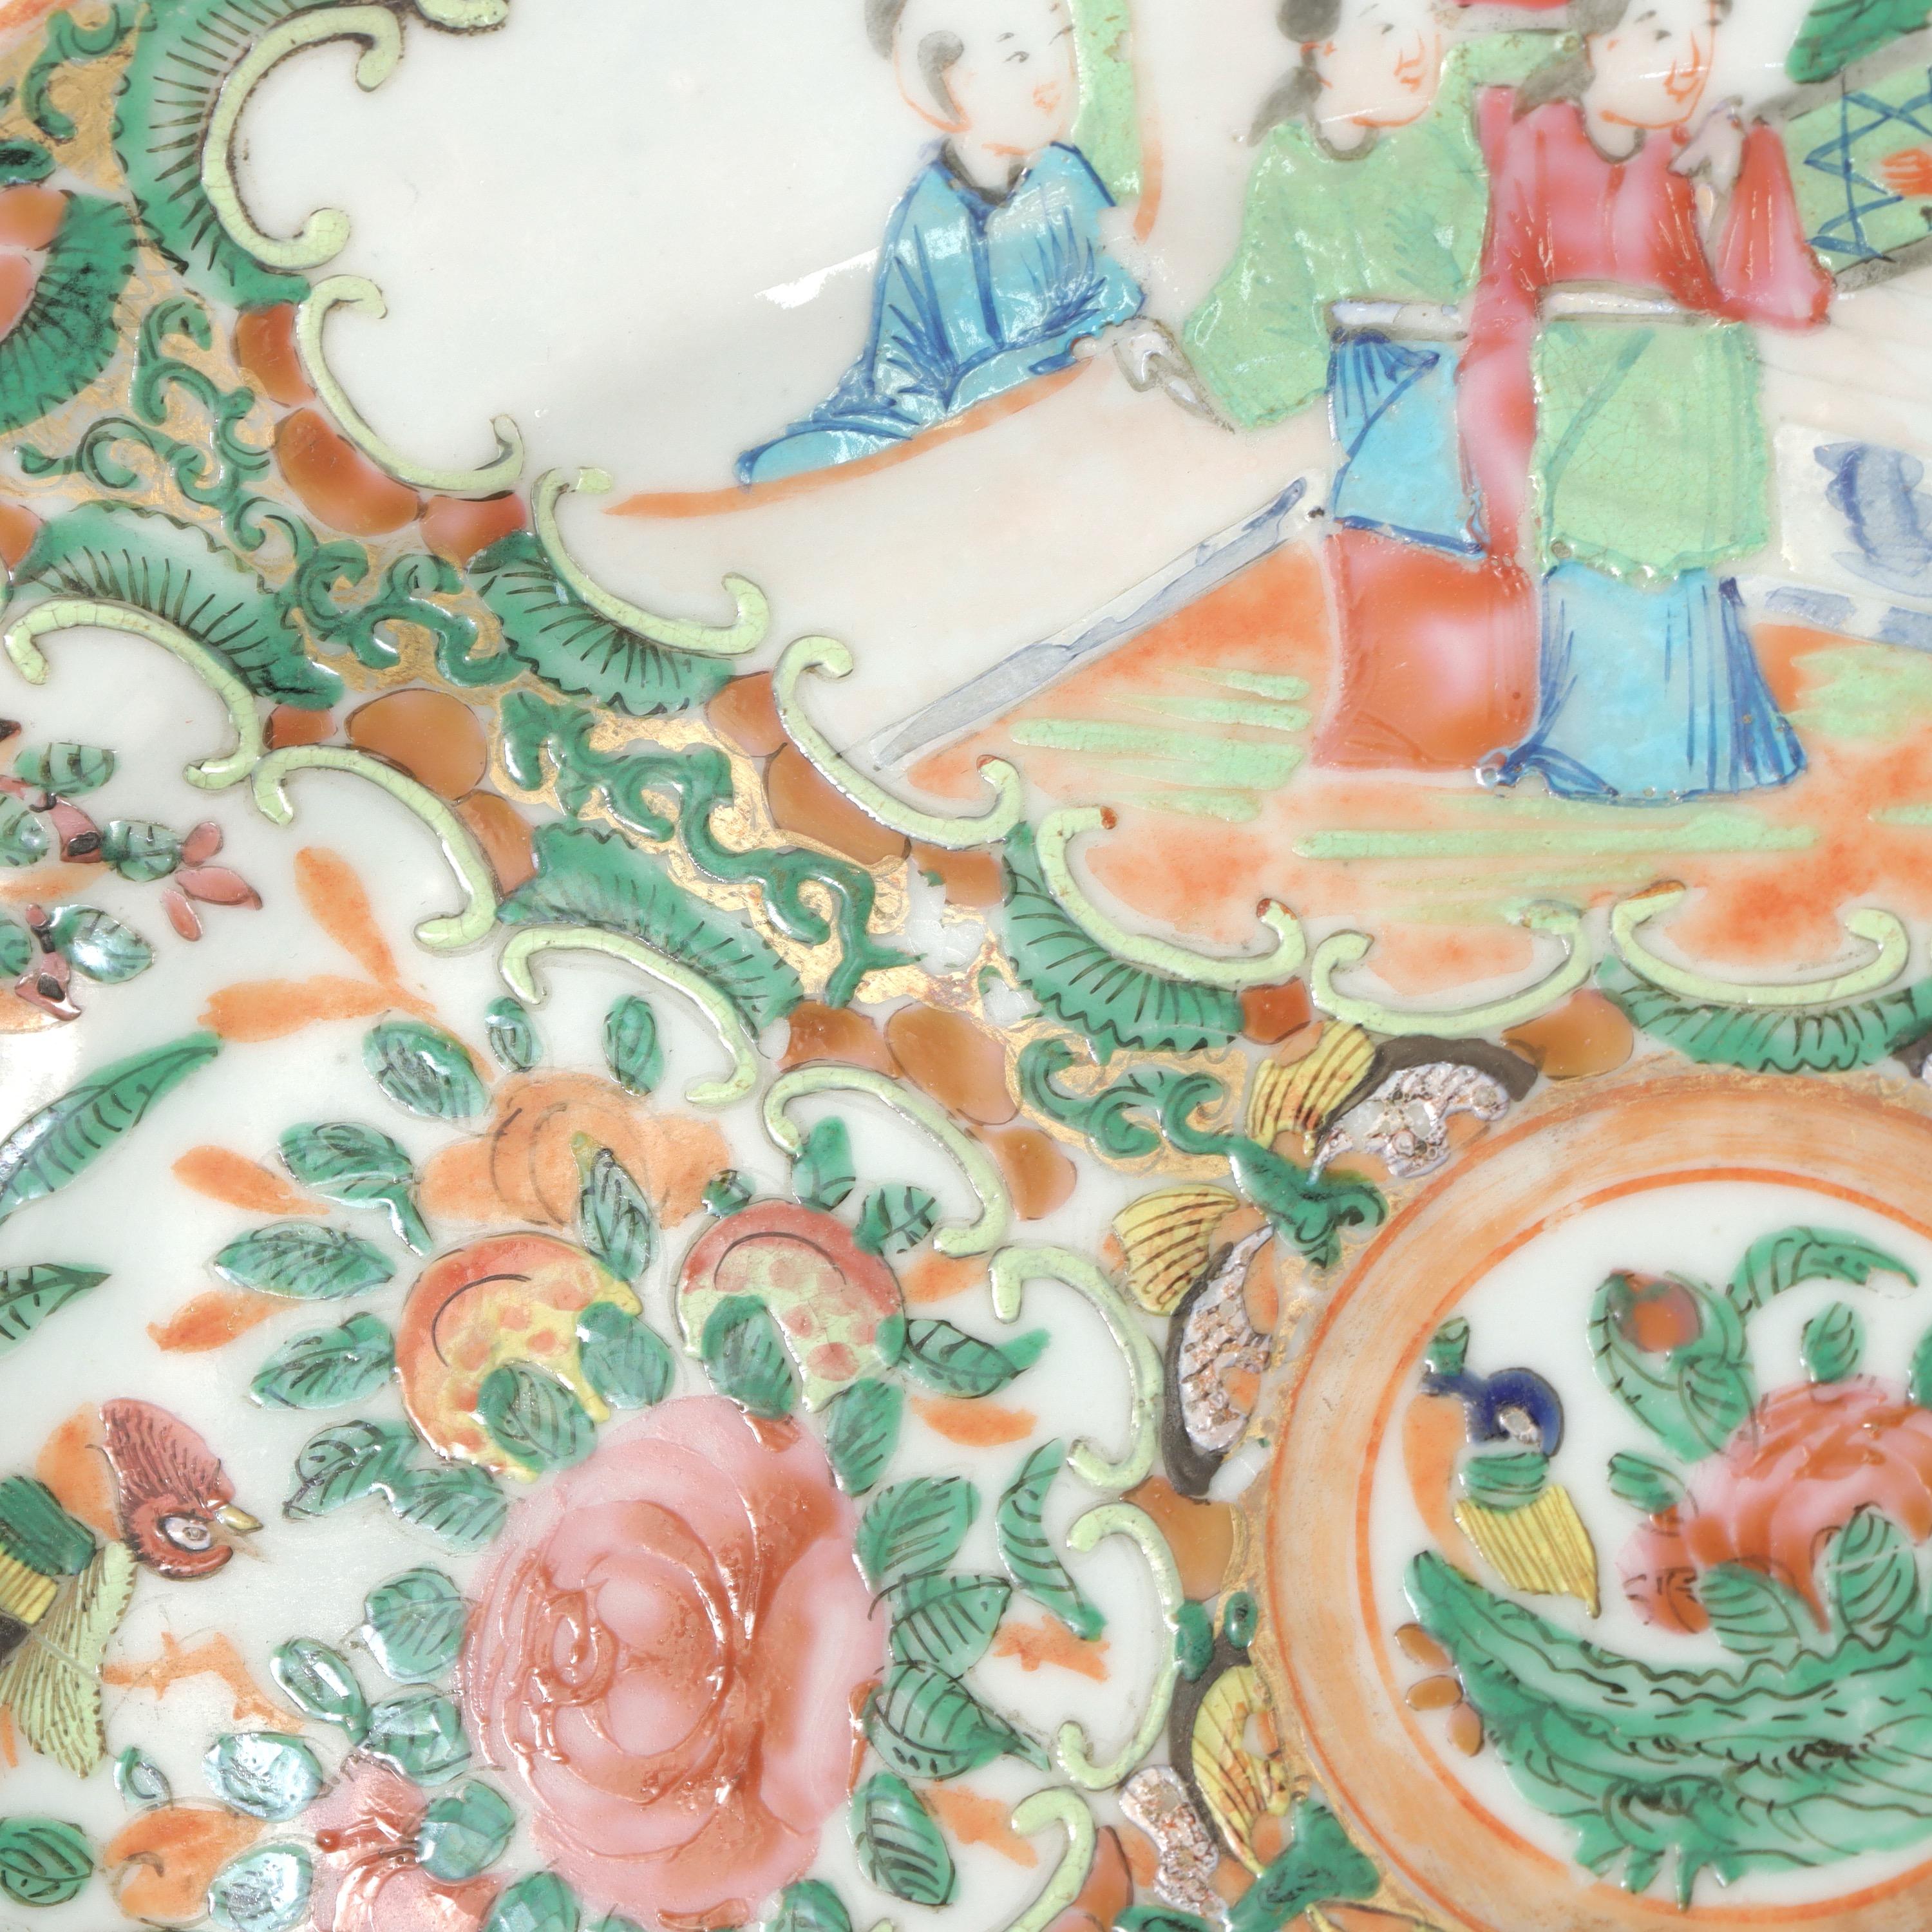 Antique Chinese Export Porcelain Rose Medallion Tray For Sale 6